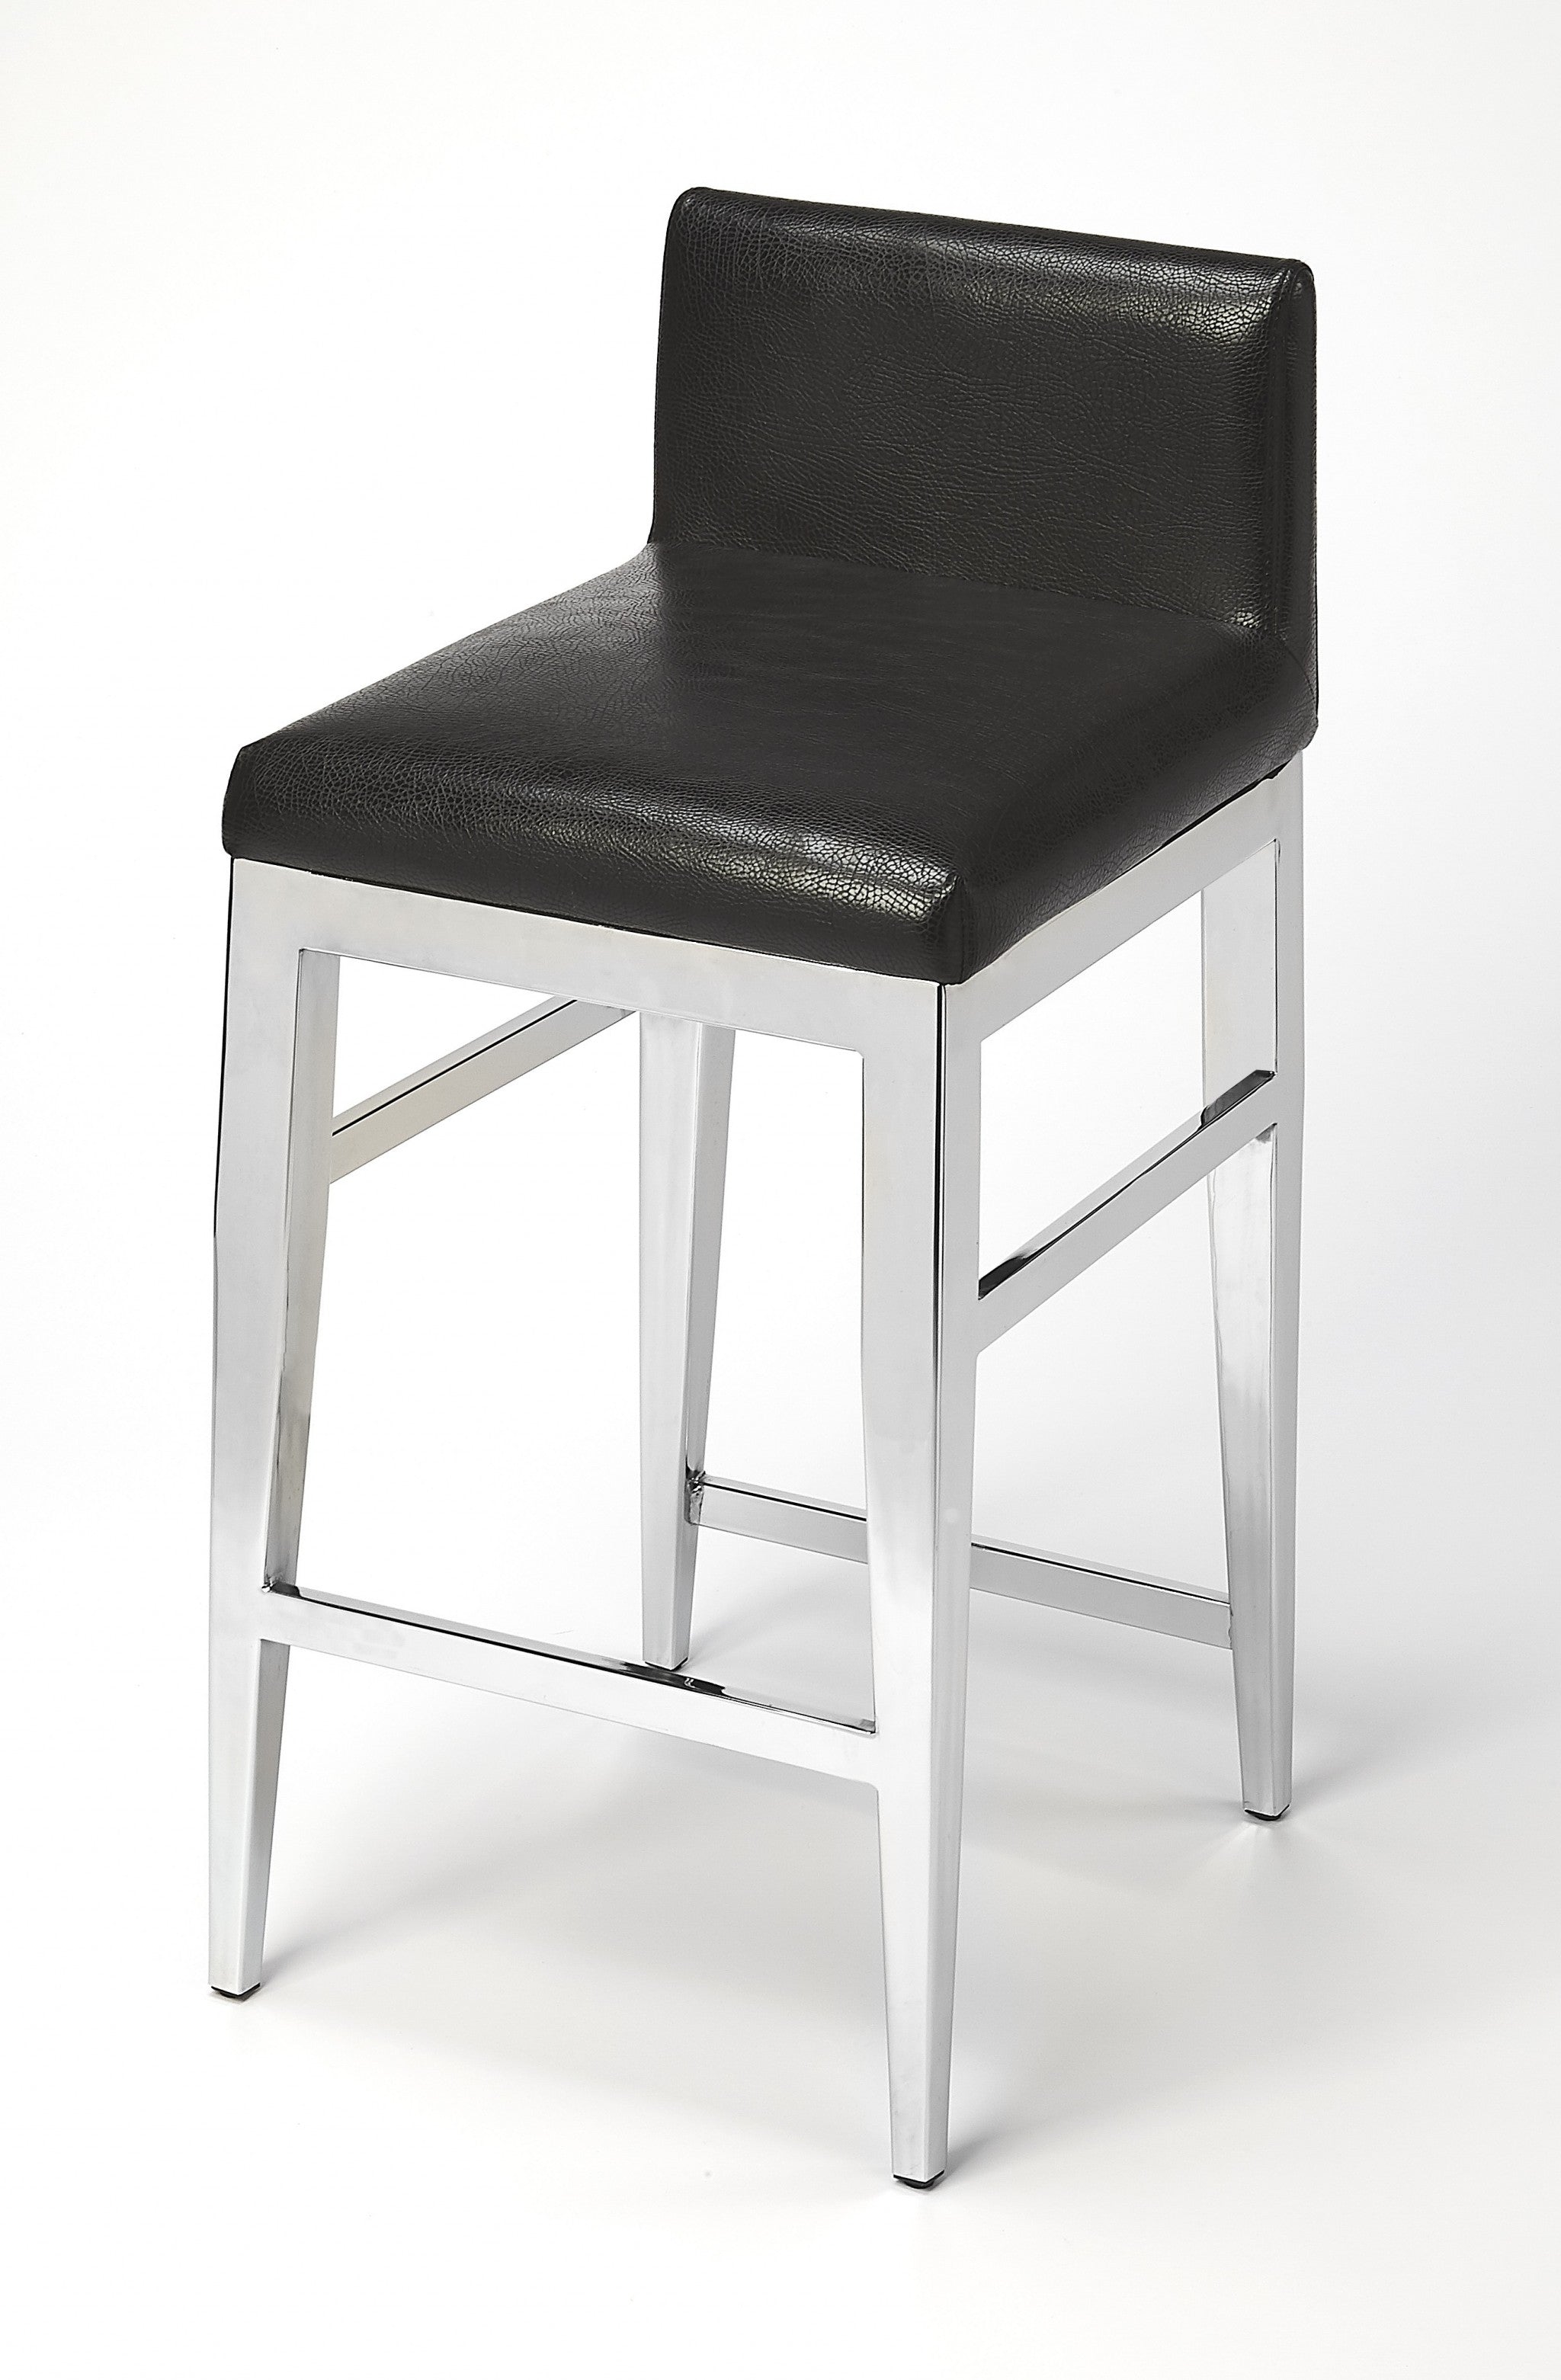 25" Brown Stainless Steel Bar Chair